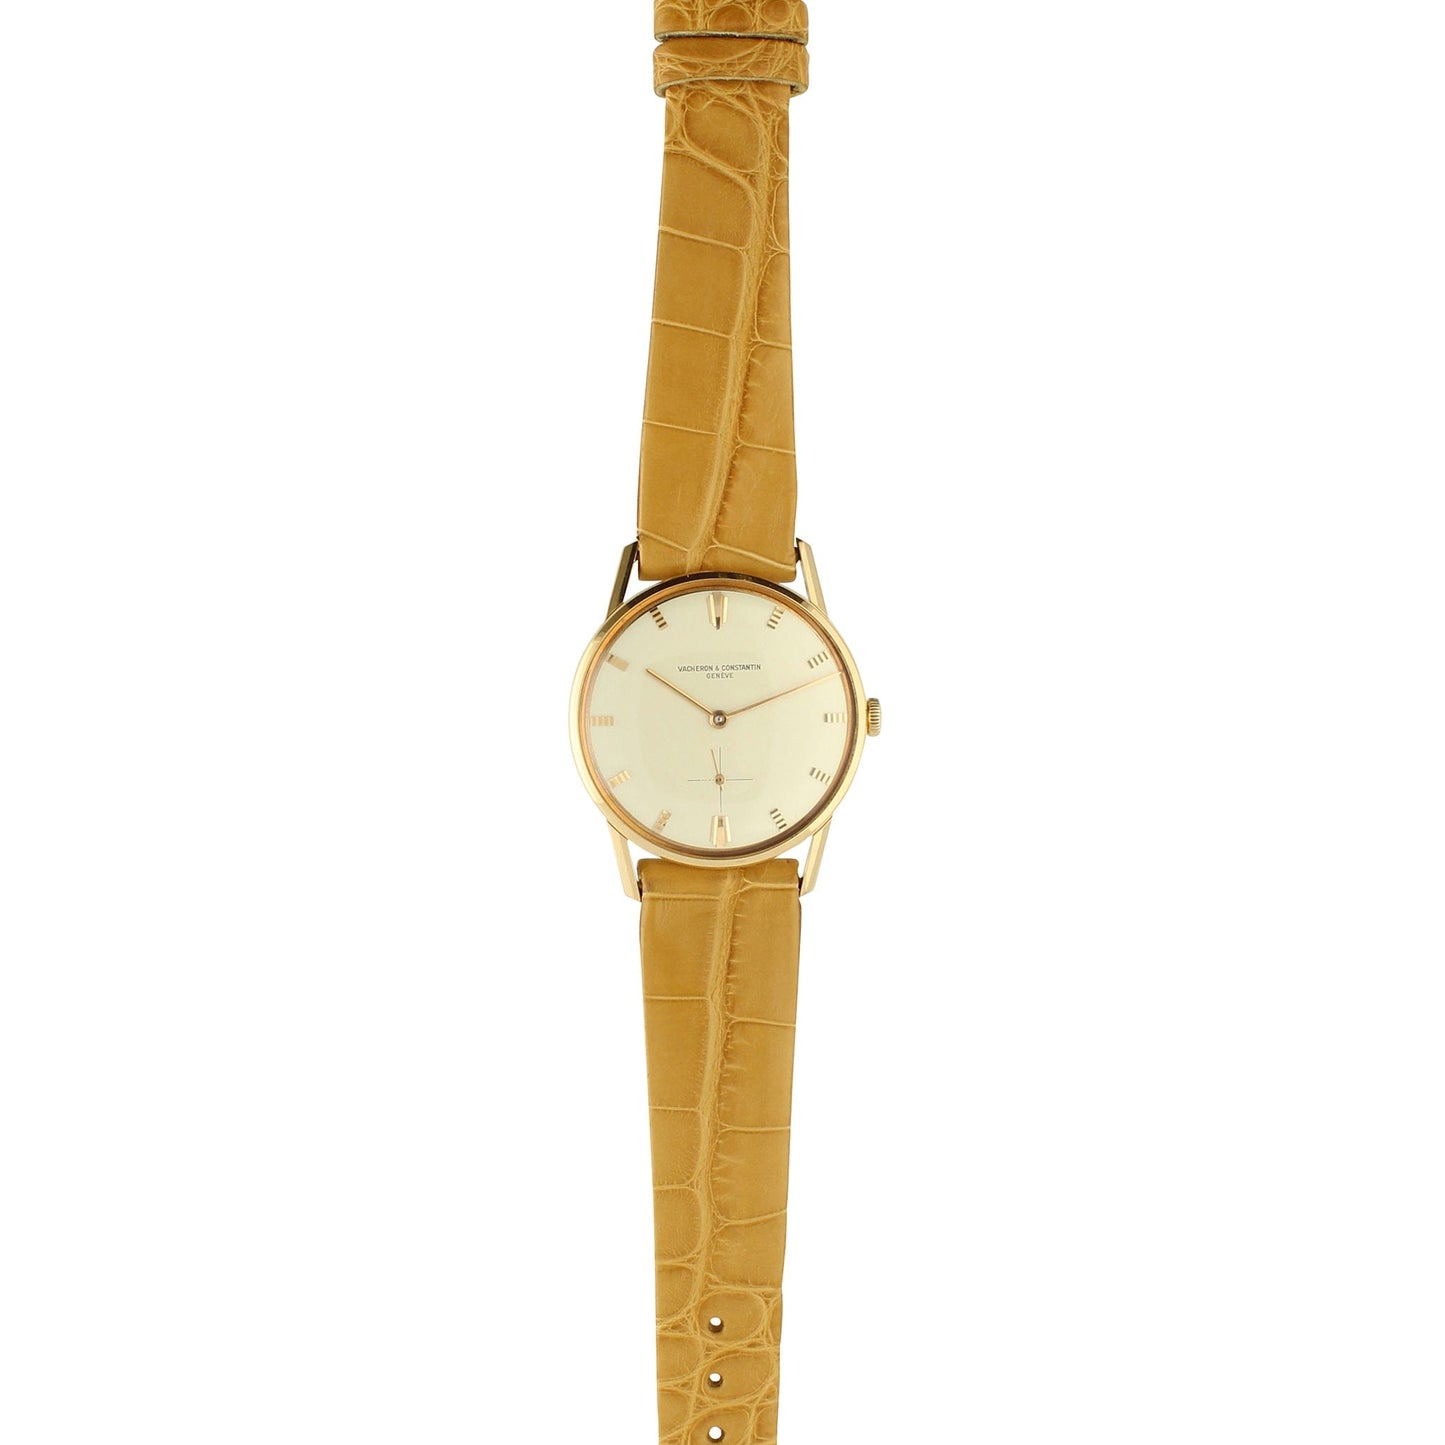 18ct rose gold, reference 6484 wristwatch. Made 1950's